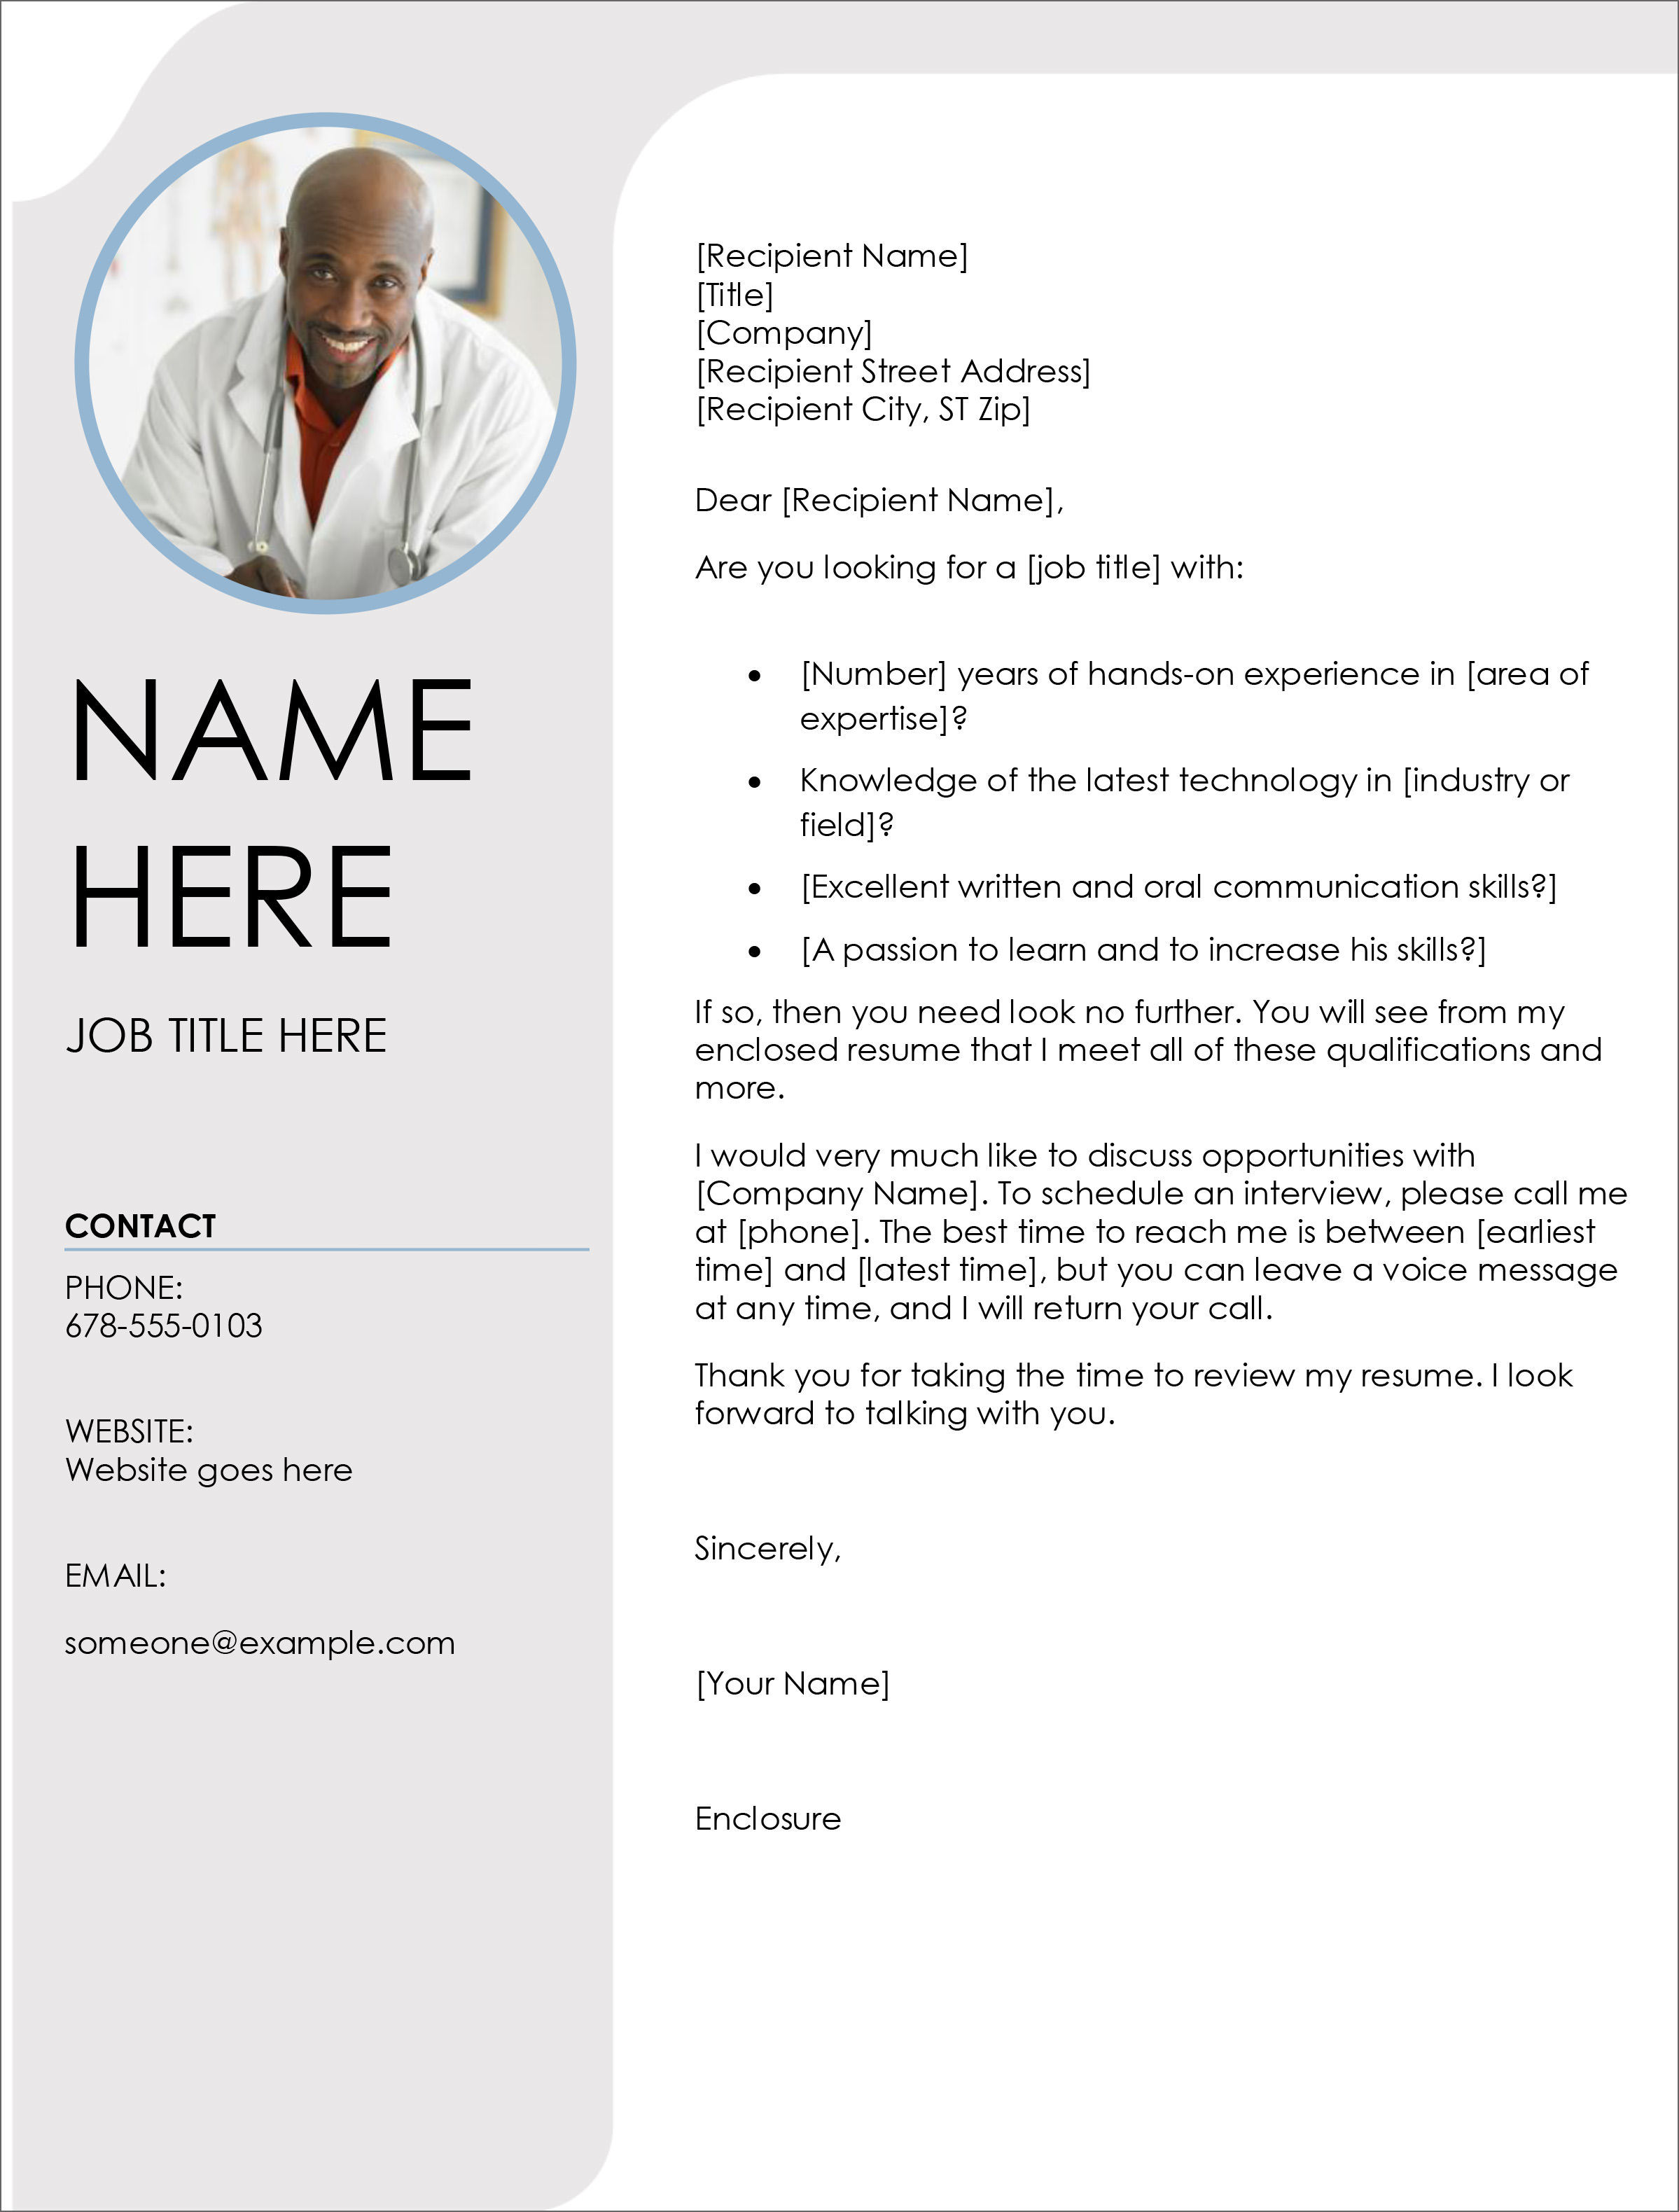 Microsoft Word Cover Letter Templates Database Letter Template Collection